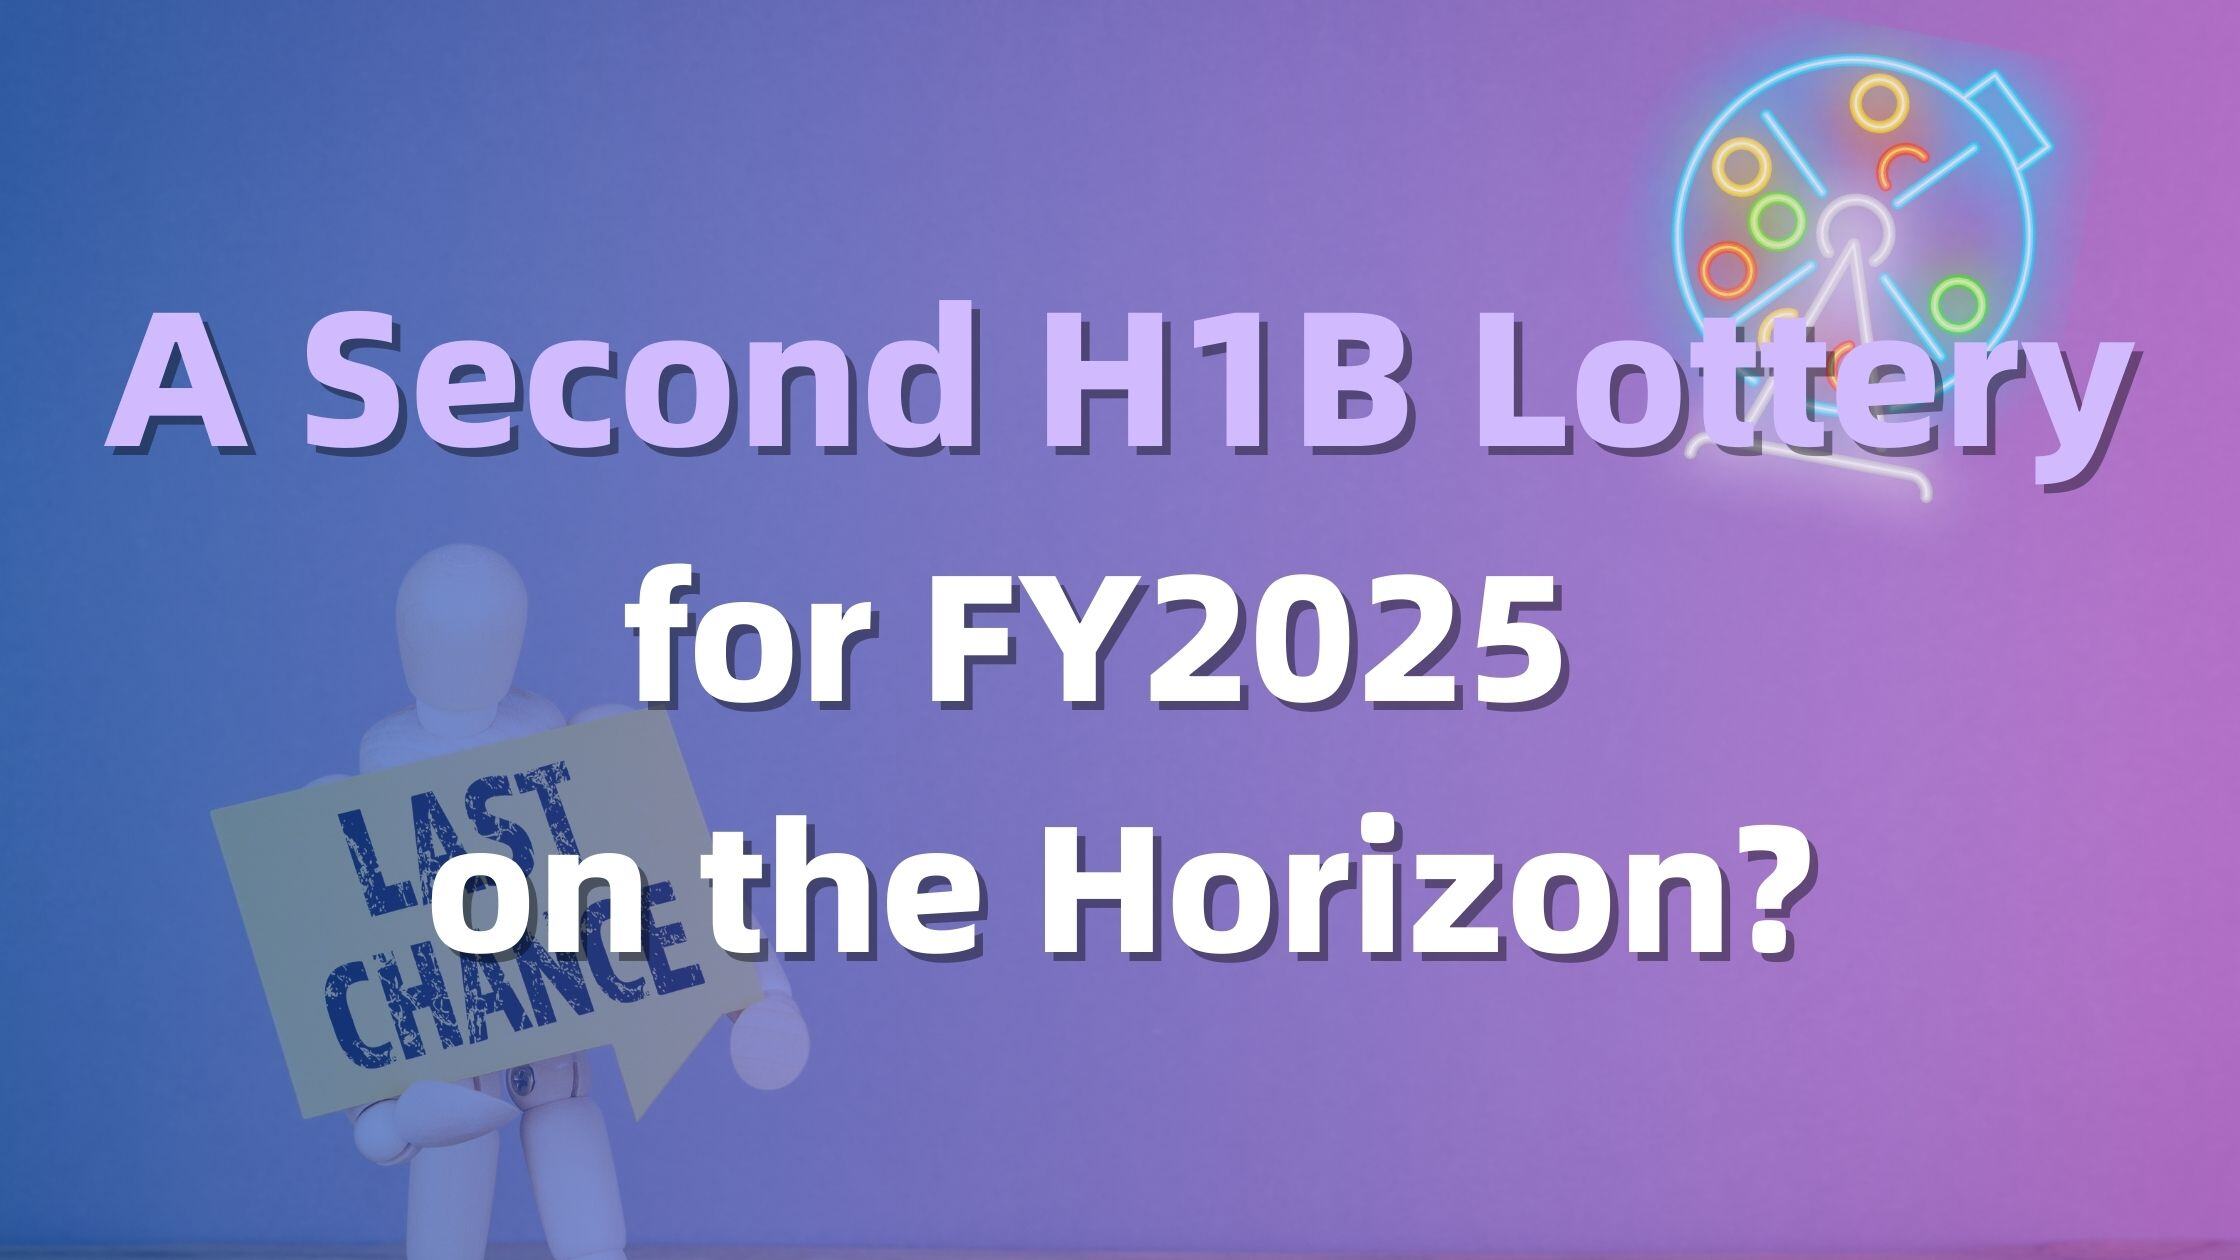 a Second H1B Lottery for FY2025